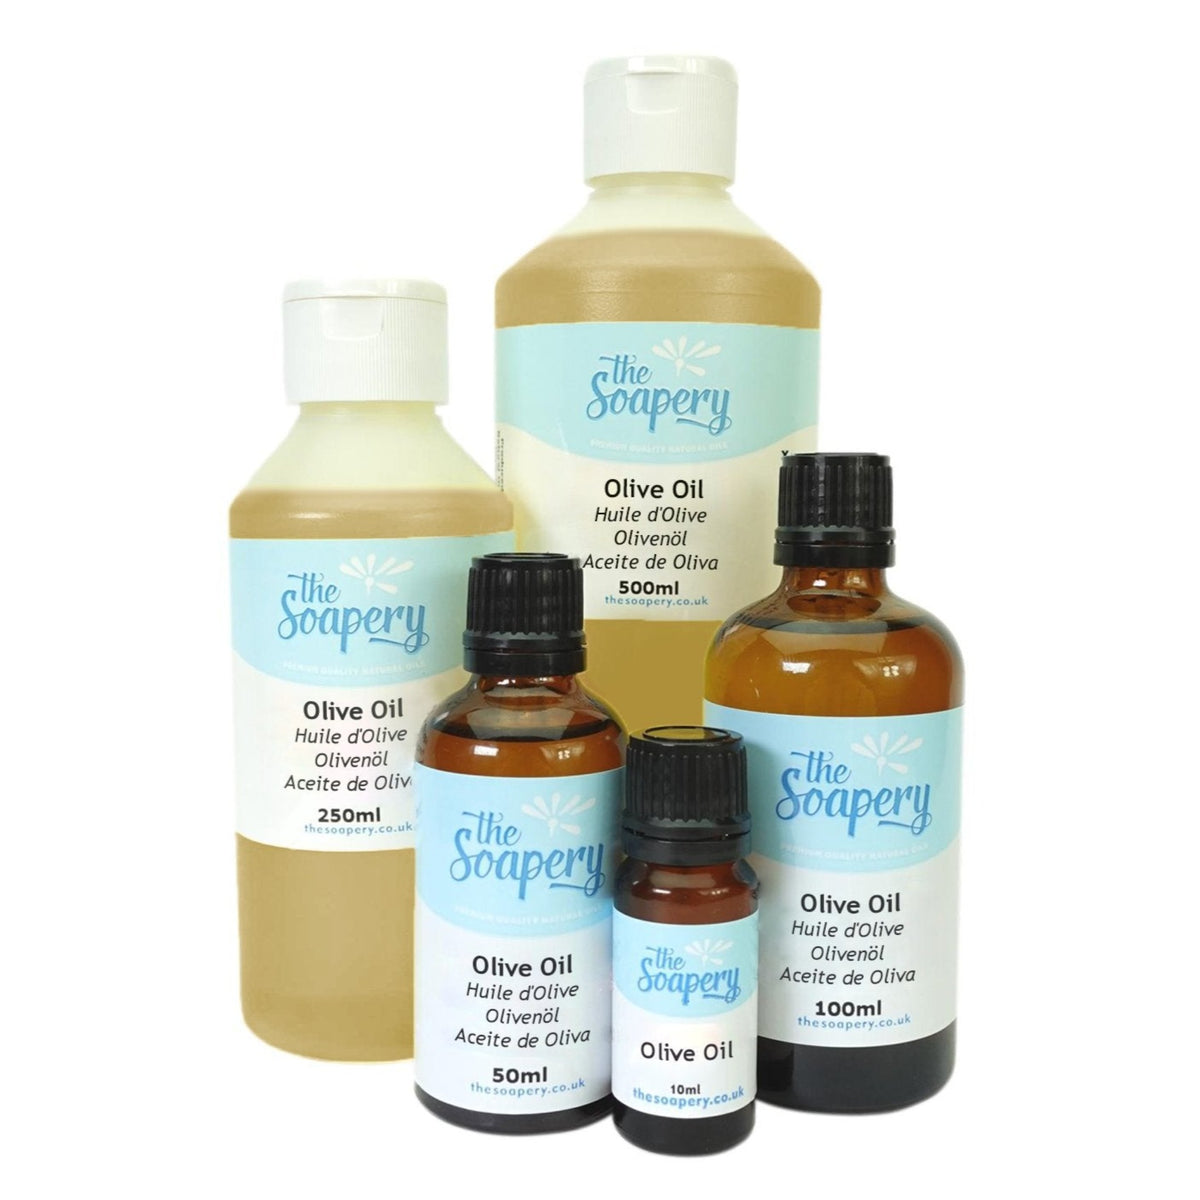 www.thesoapery.co.uk